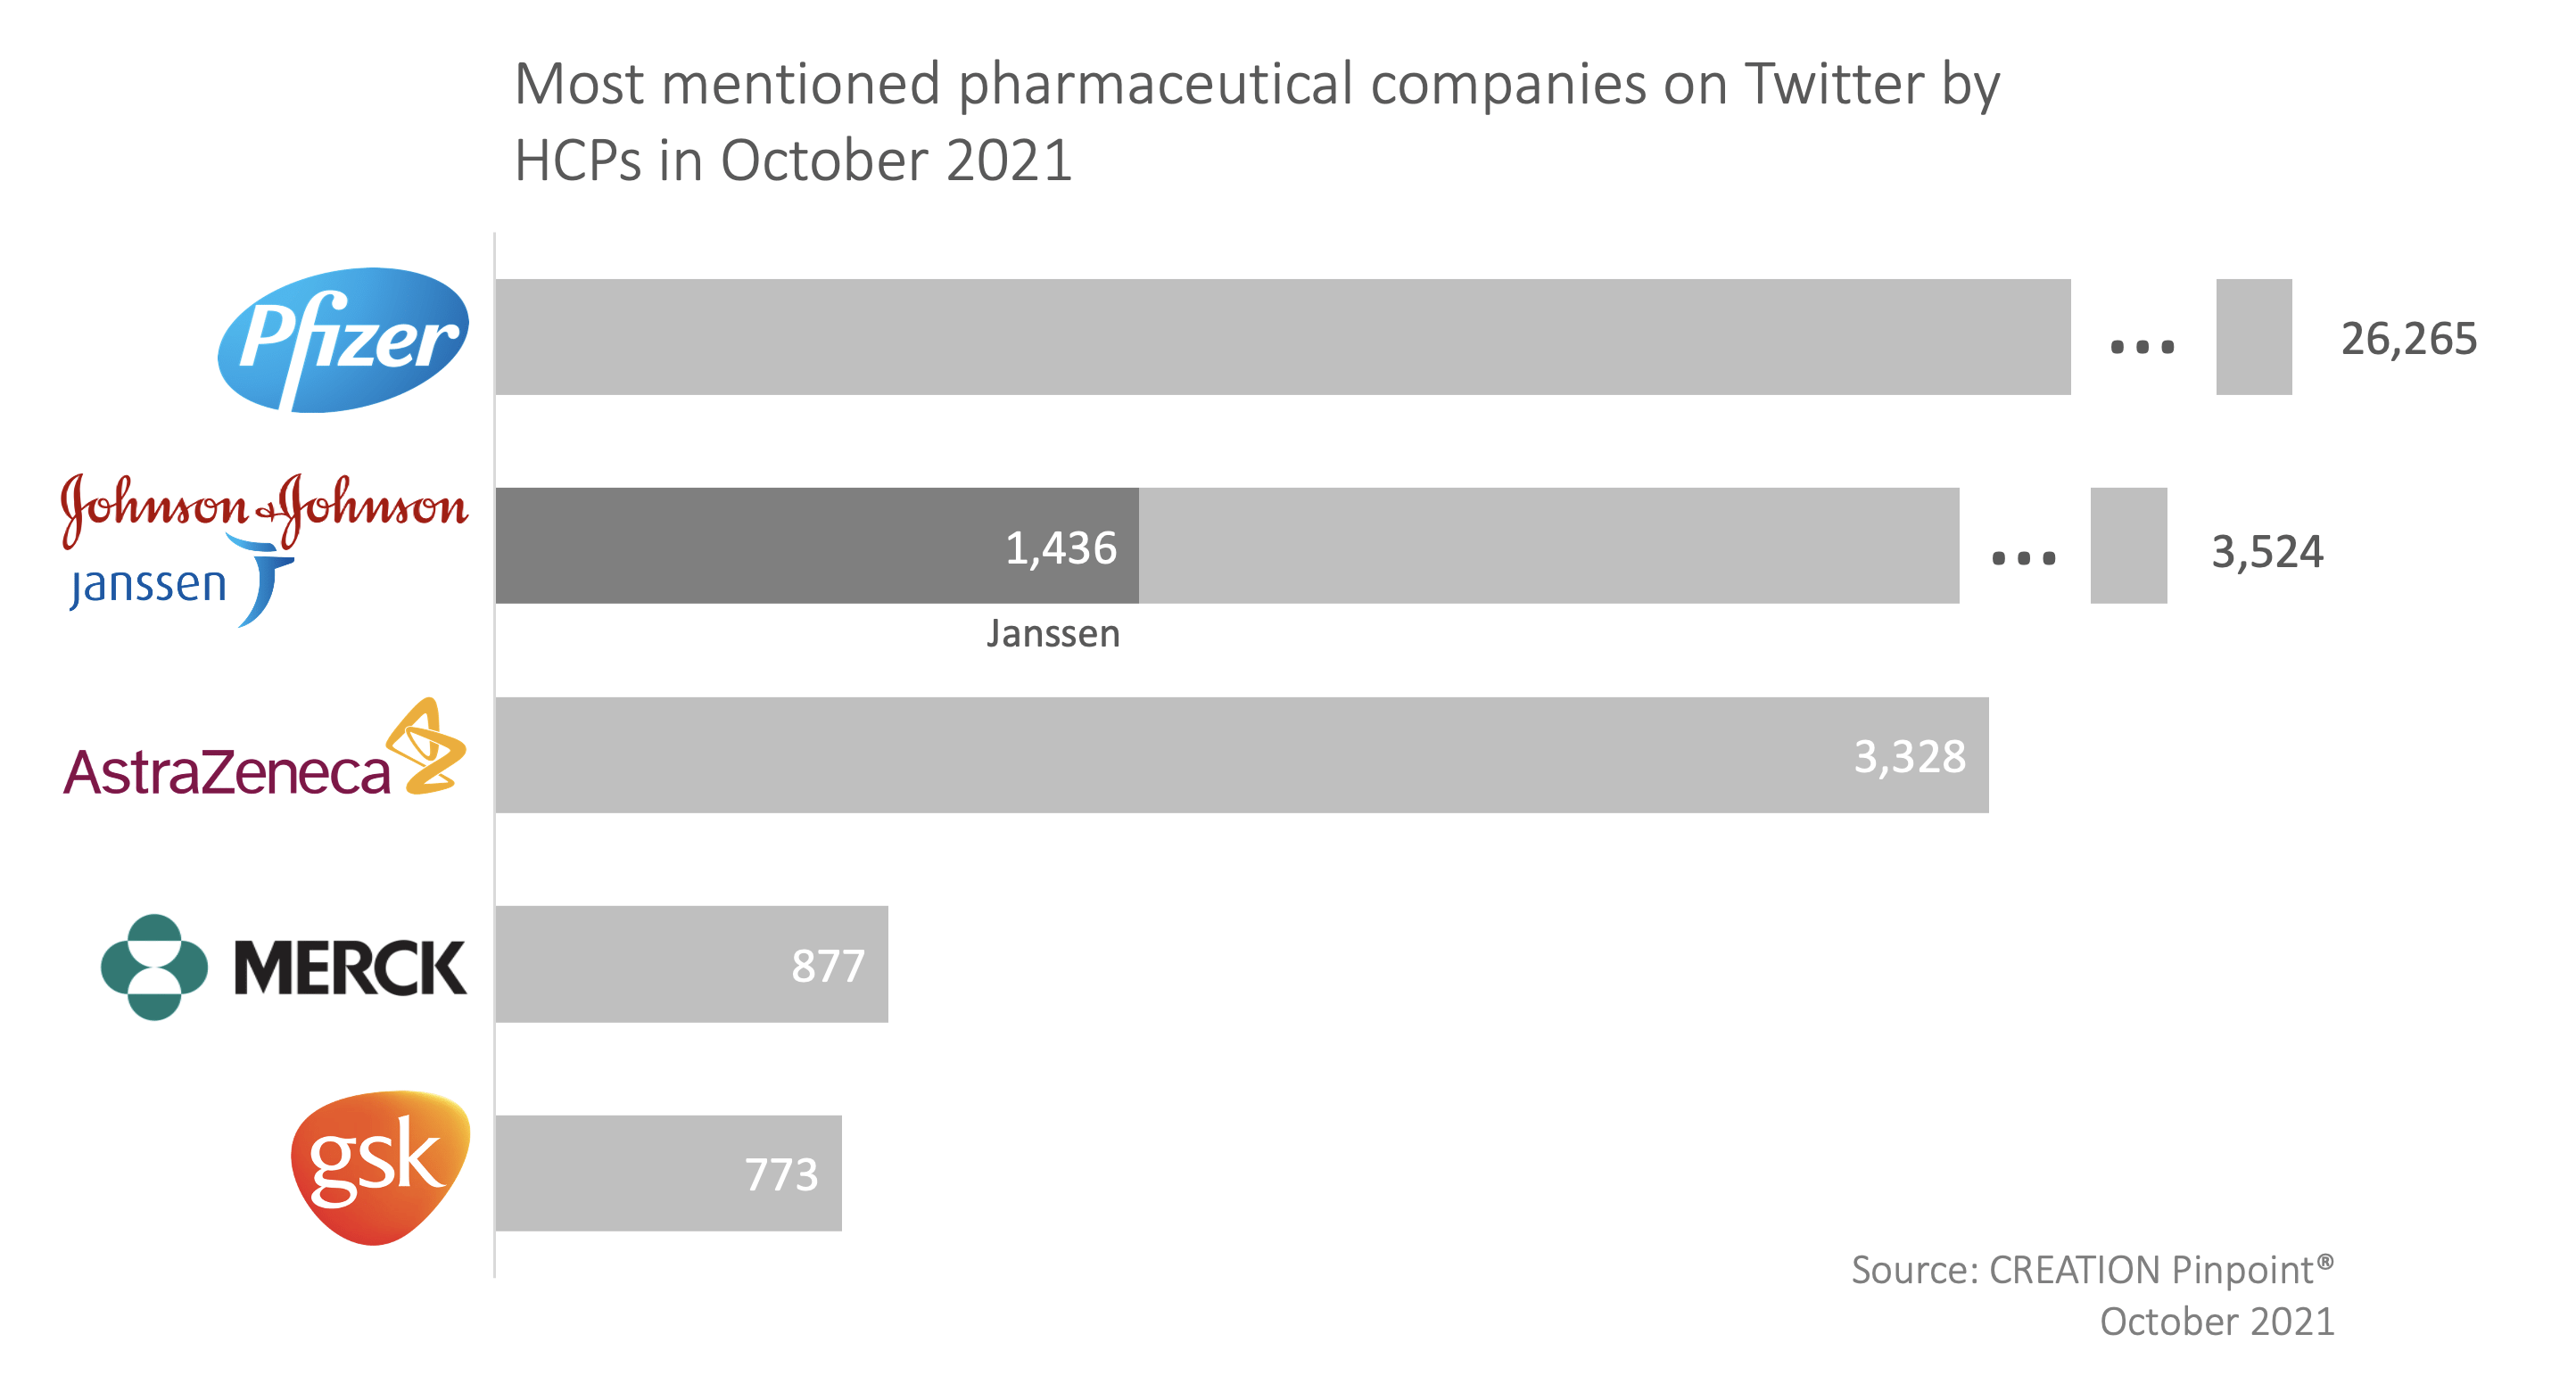 The top 5 pharmaceutical companies mentioned by HCPs on Twitter in October 2021